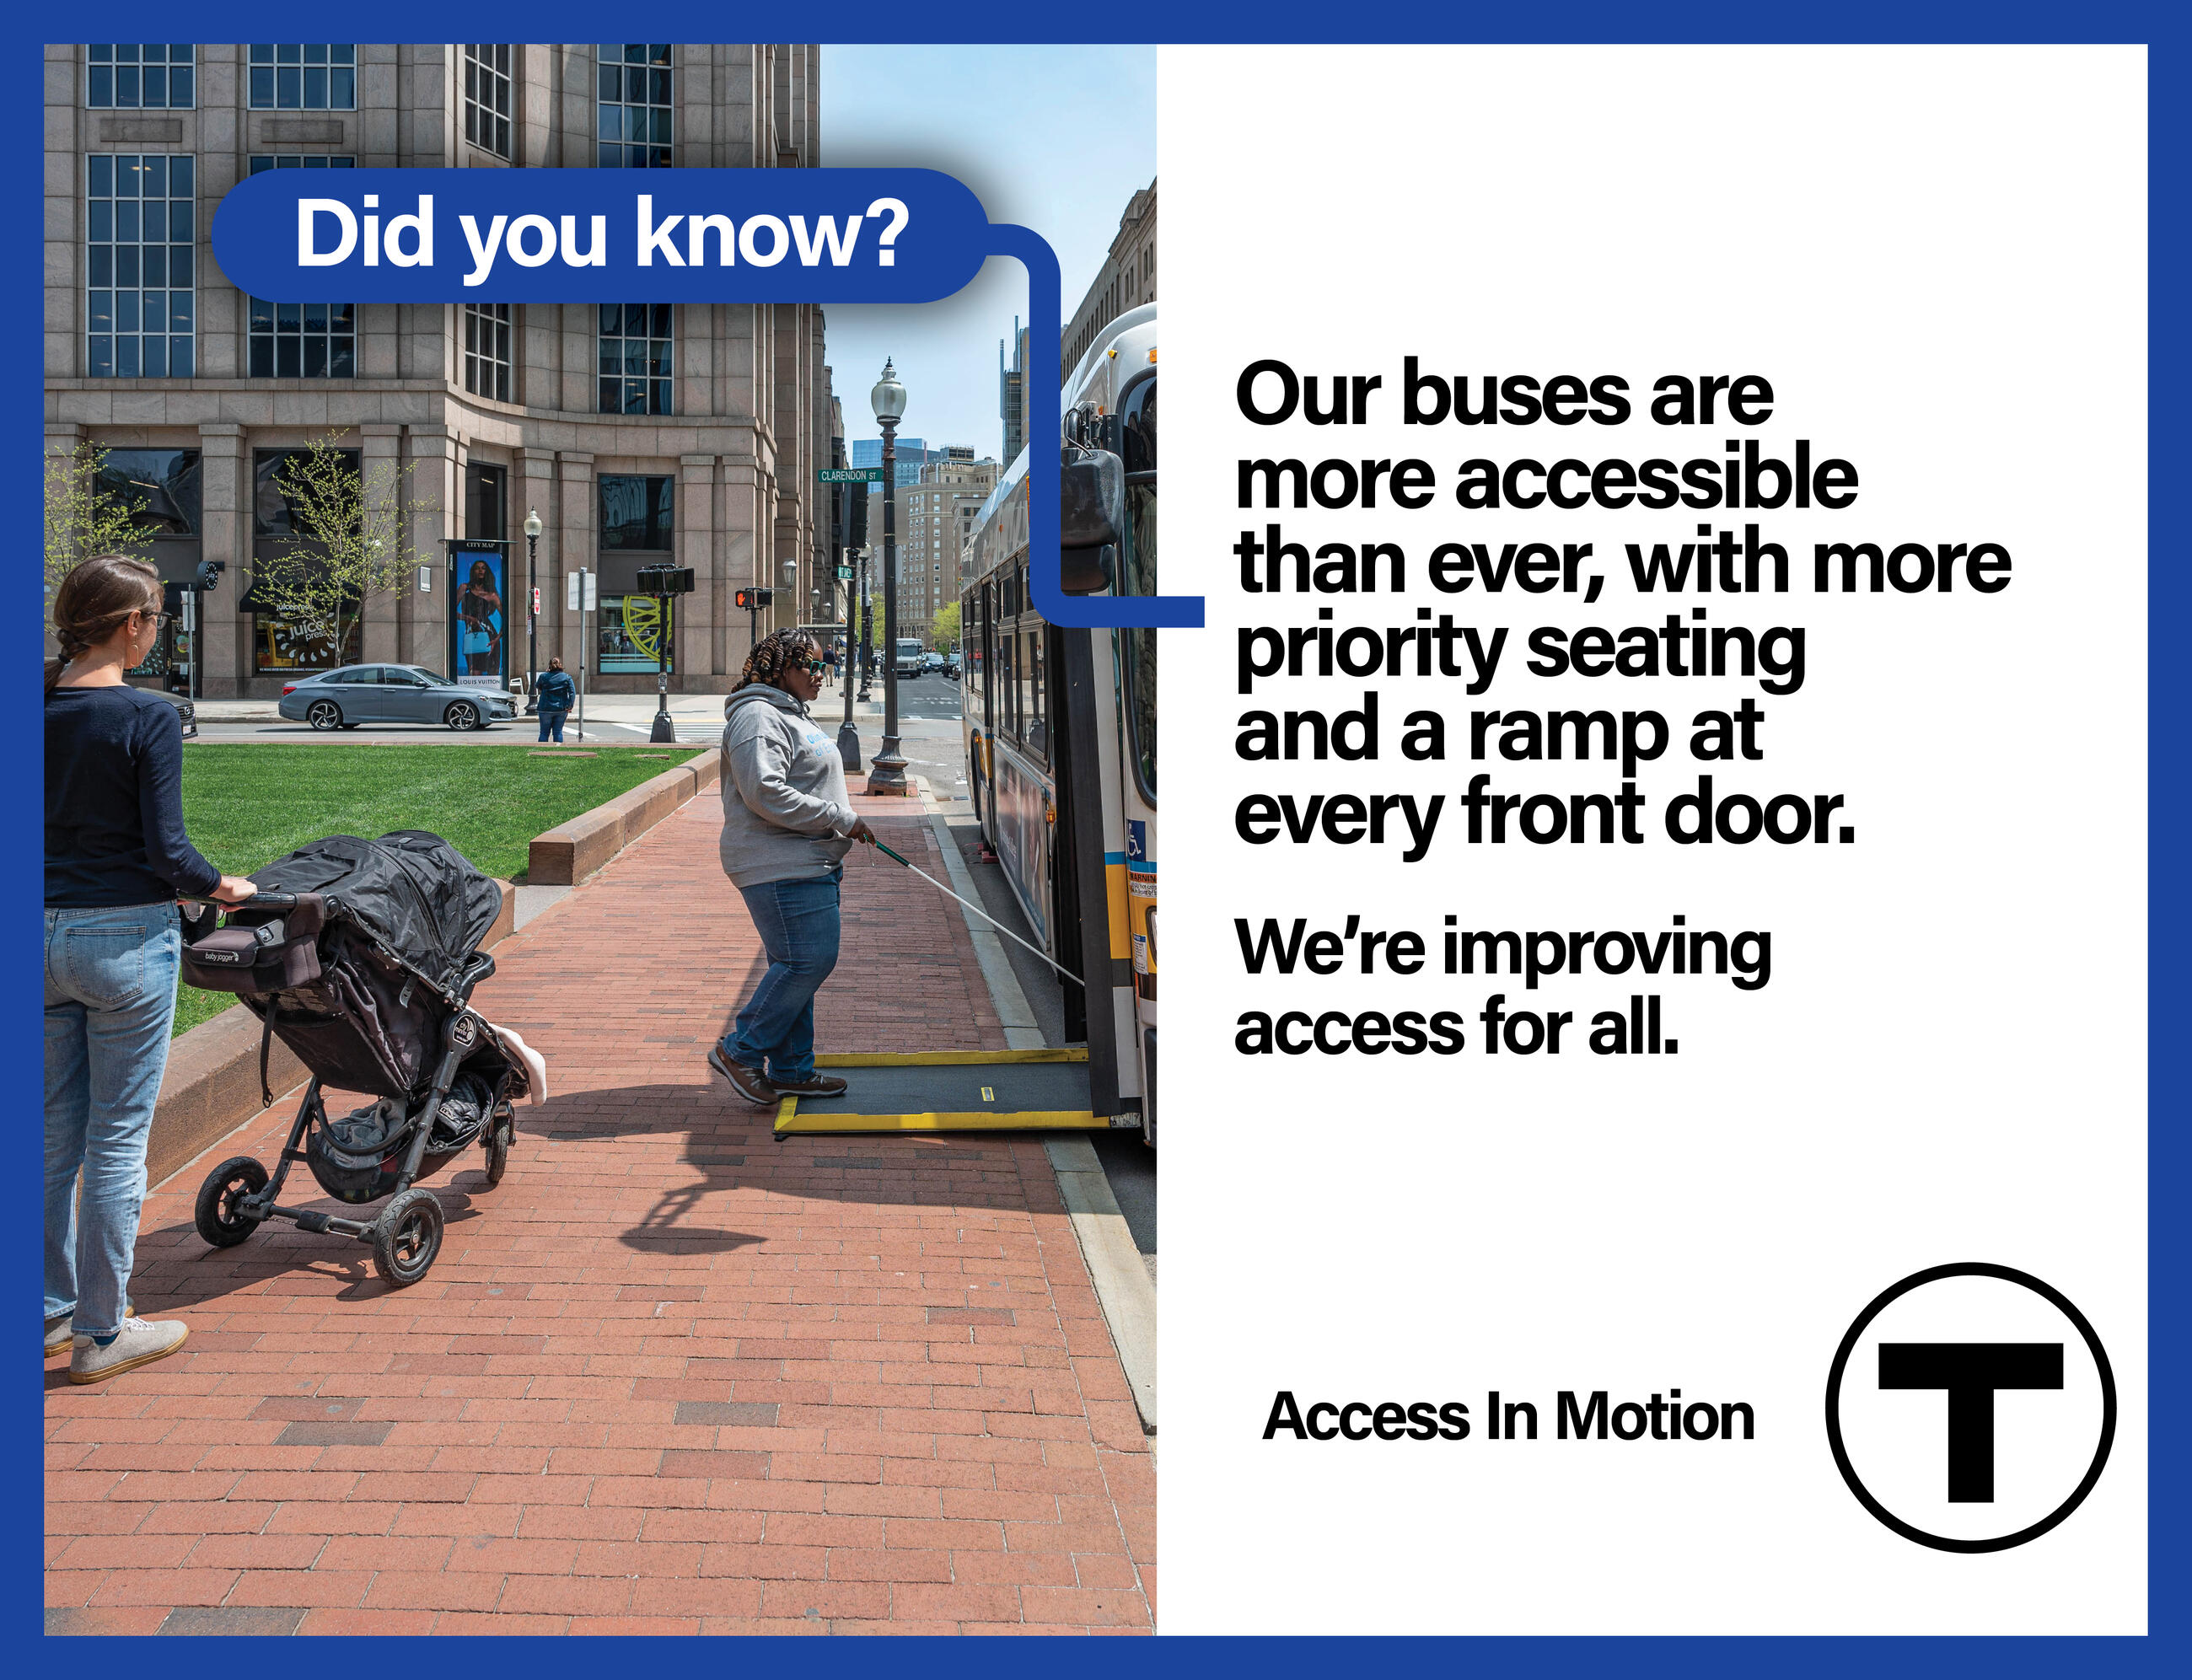 On a city sidewalk, an African American woman wearing sunglasses and using a white cane boards a bus using the ramp. A white woman pushing a stroller waits to board behind her. The words “Did you know?” appear in a blue bubble in the foreground.  Text reads: “Our buses are more accessible than ever, with more priority seating and a ramp at every front door.” Smaller text reads: “We’re improving access for all.” followed by the “Access In Motion” tagline and the T logo.